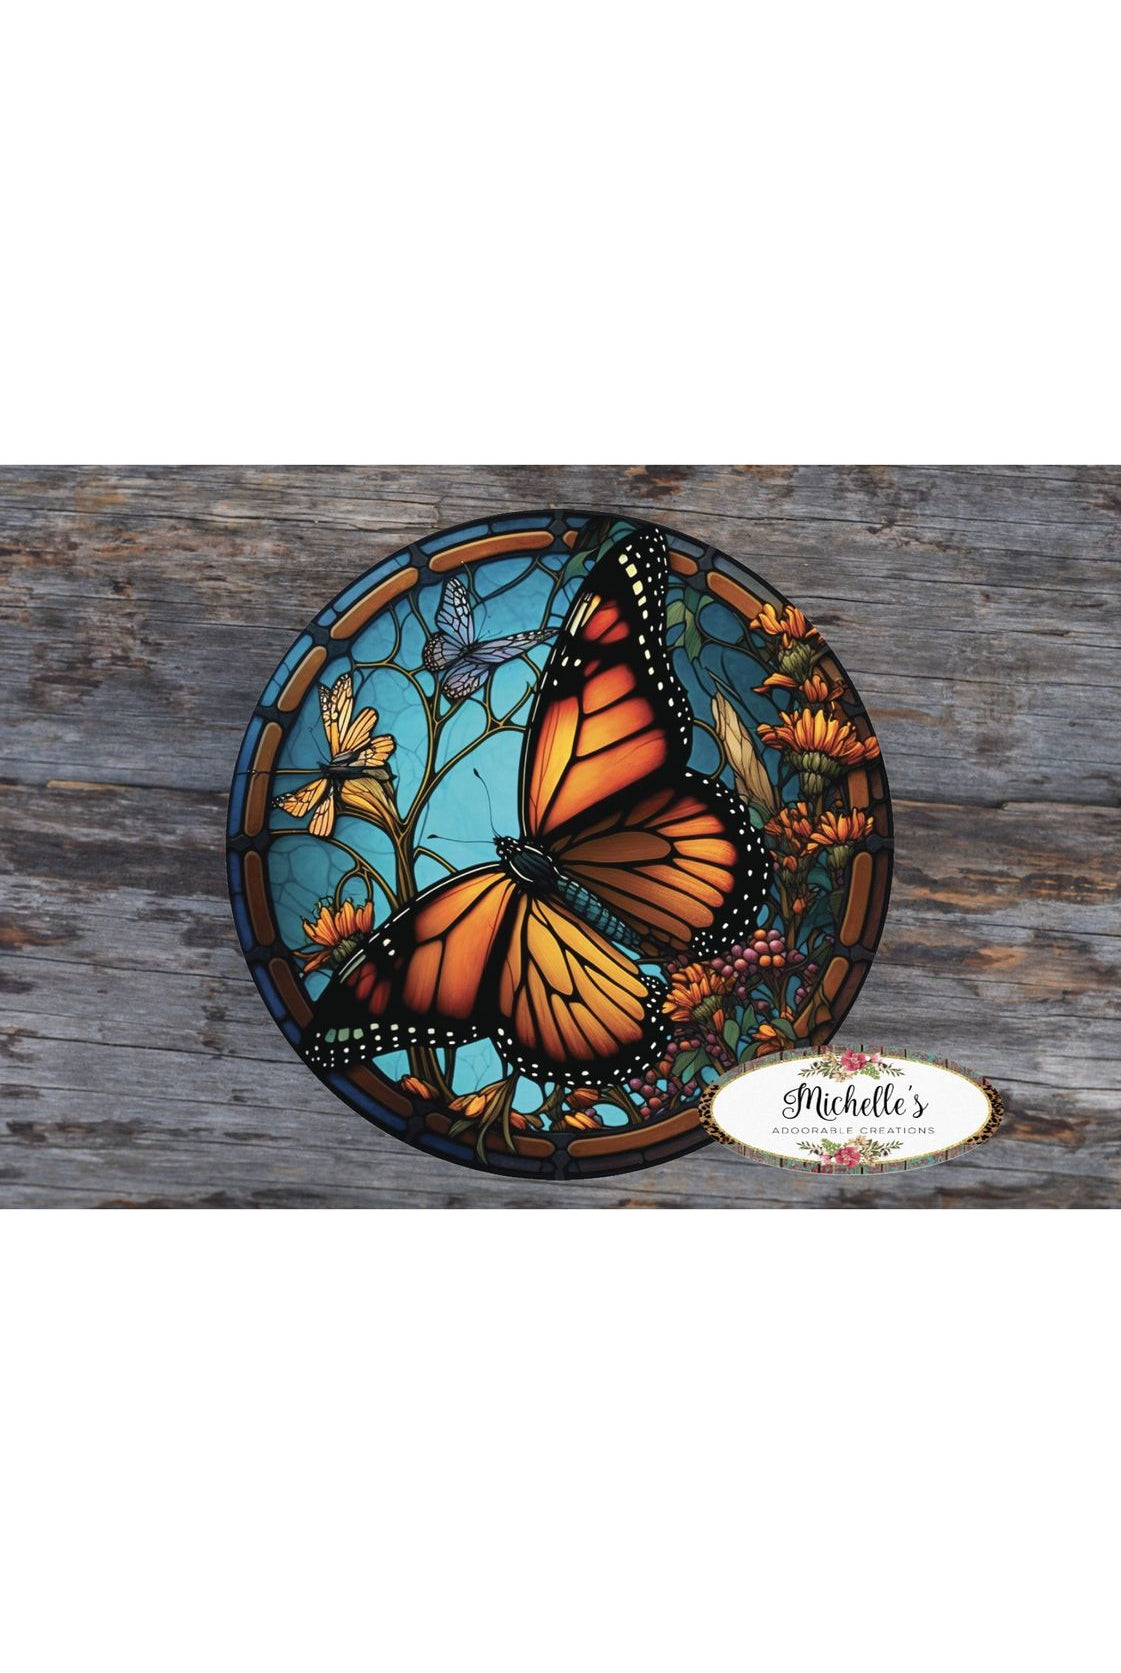 Shop For Monarch Faux Stained Glass Butterfly Sign - Wreath Enhancement